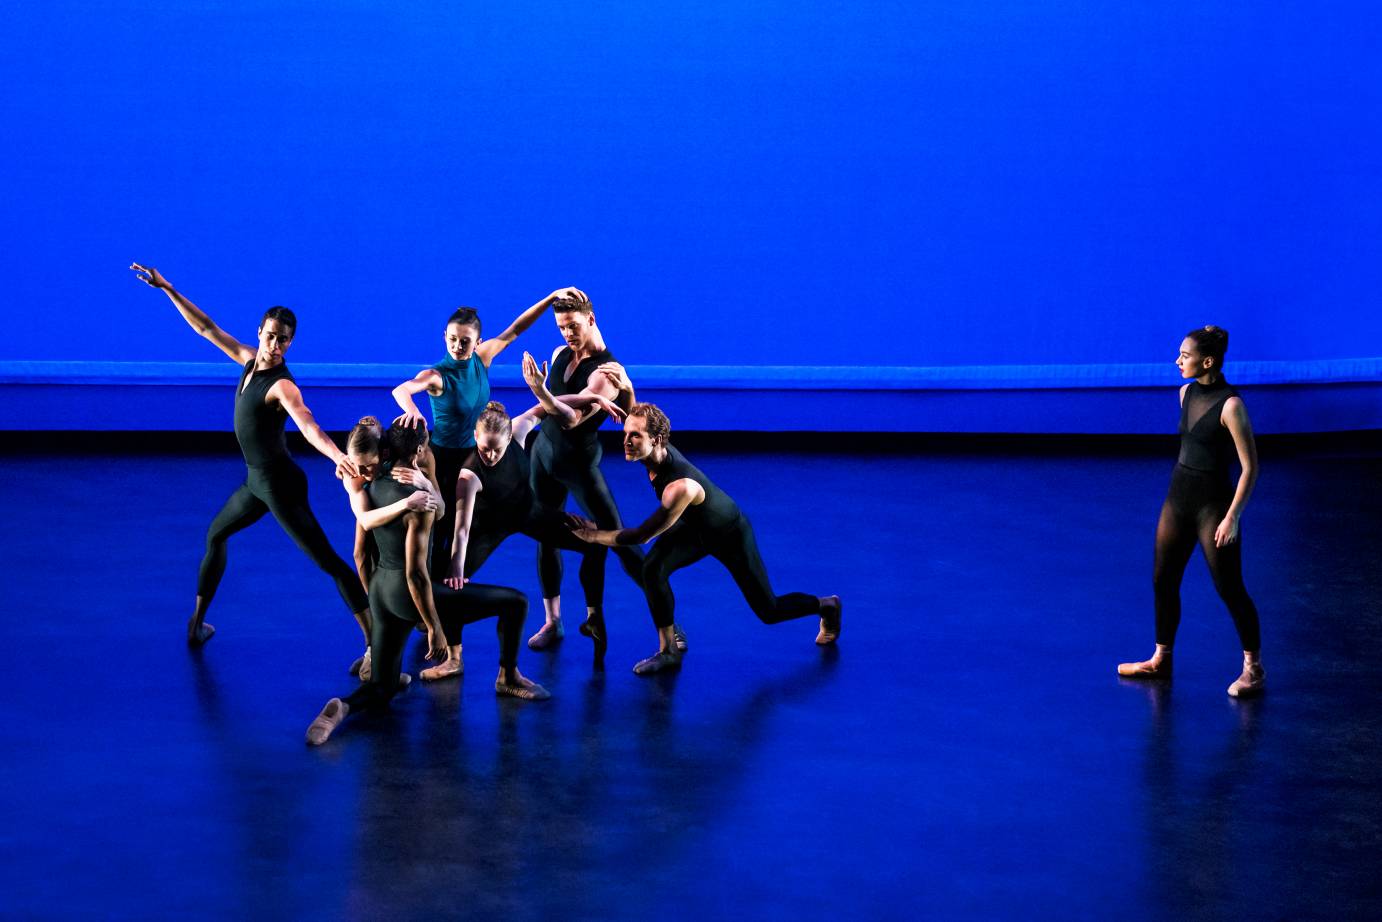 Against an electric blue cyclorama, dancers form an intricate clump as one looks on